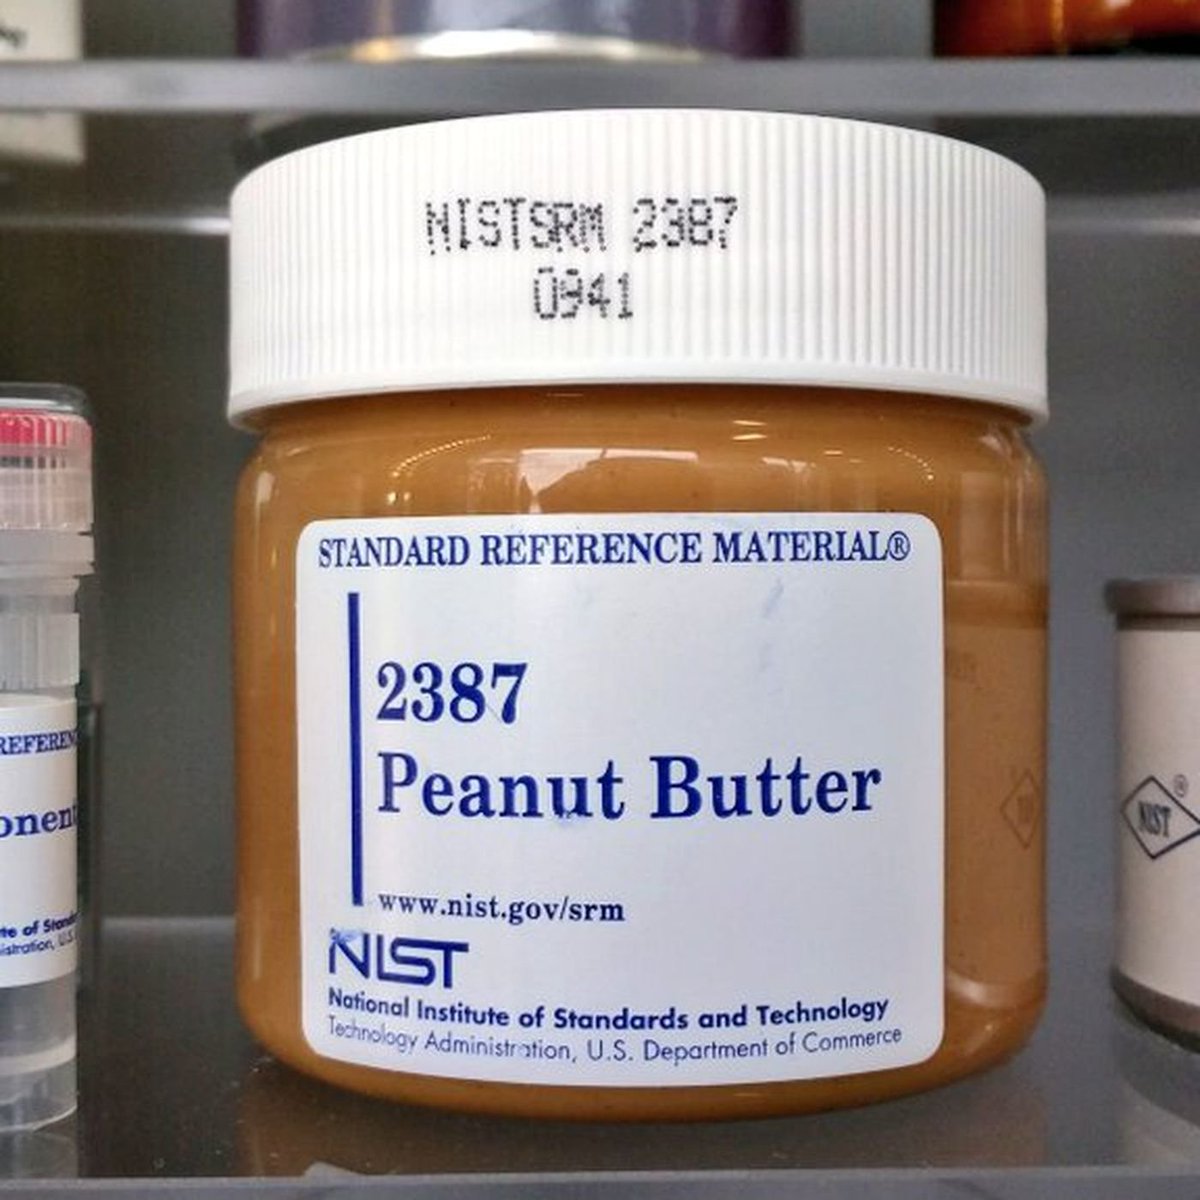 let's order strange things from NIST! first up is this jar of reference peanut butter. it's only $881 per jar!